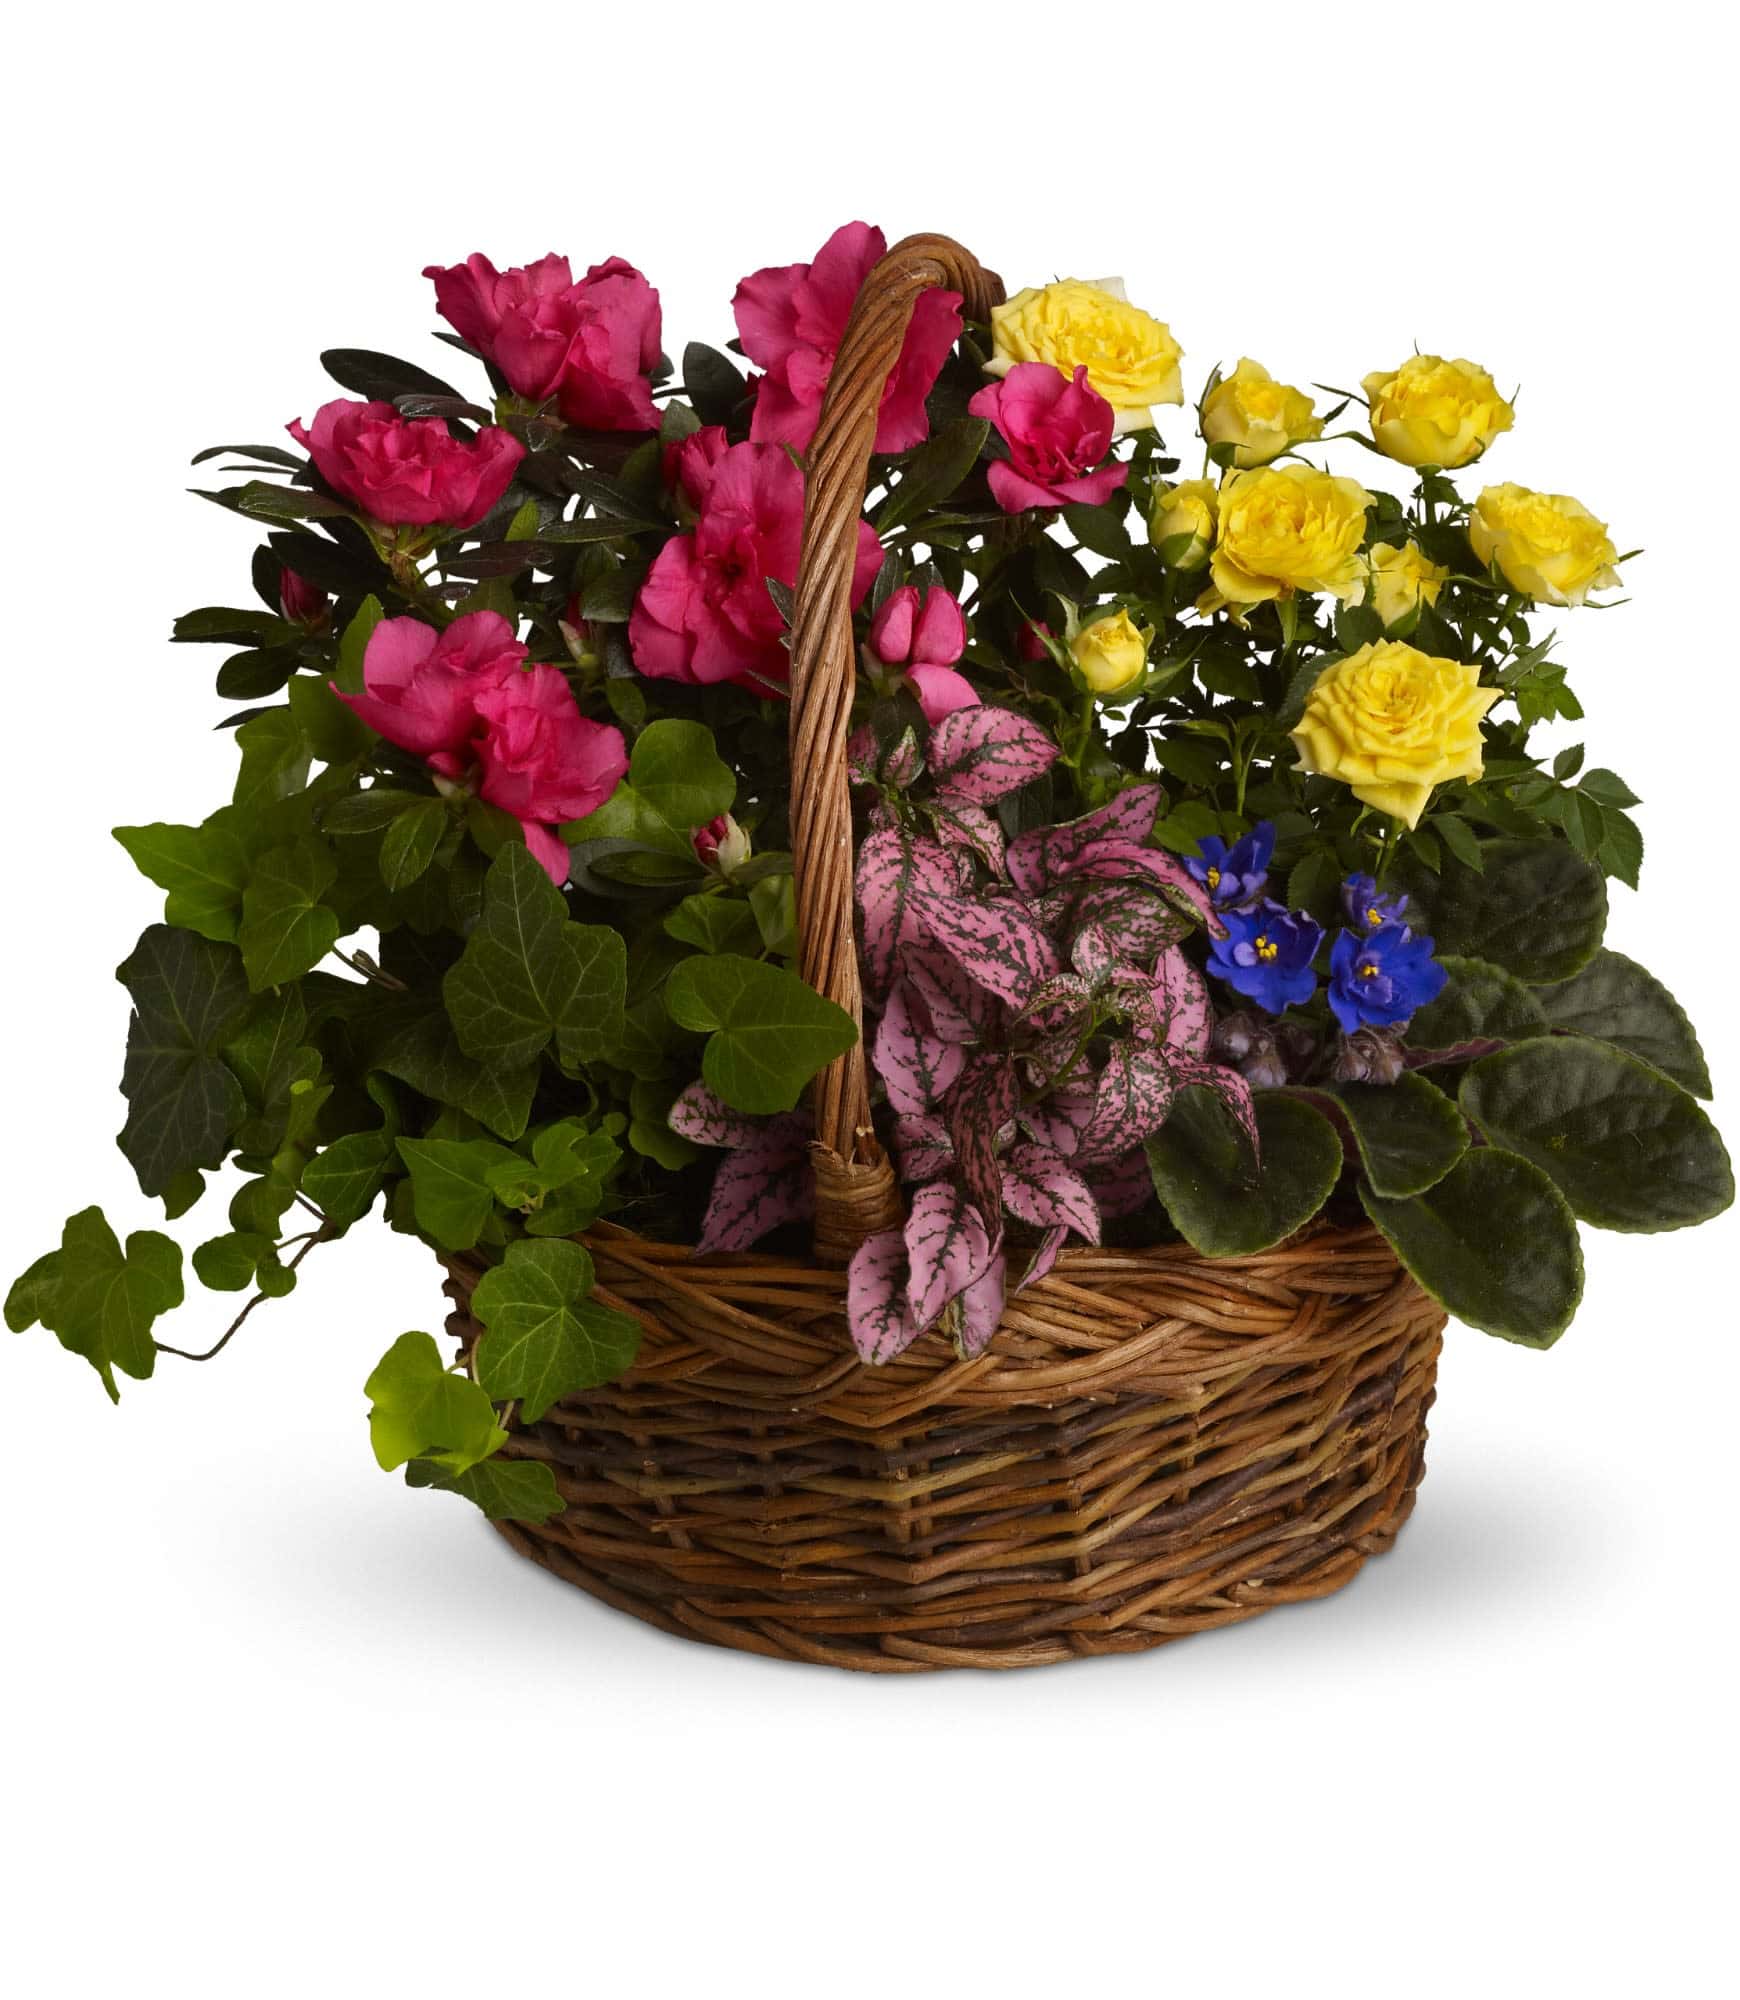 African violet, yellow rose plant, pink azalea, hypoestes and ivy plants